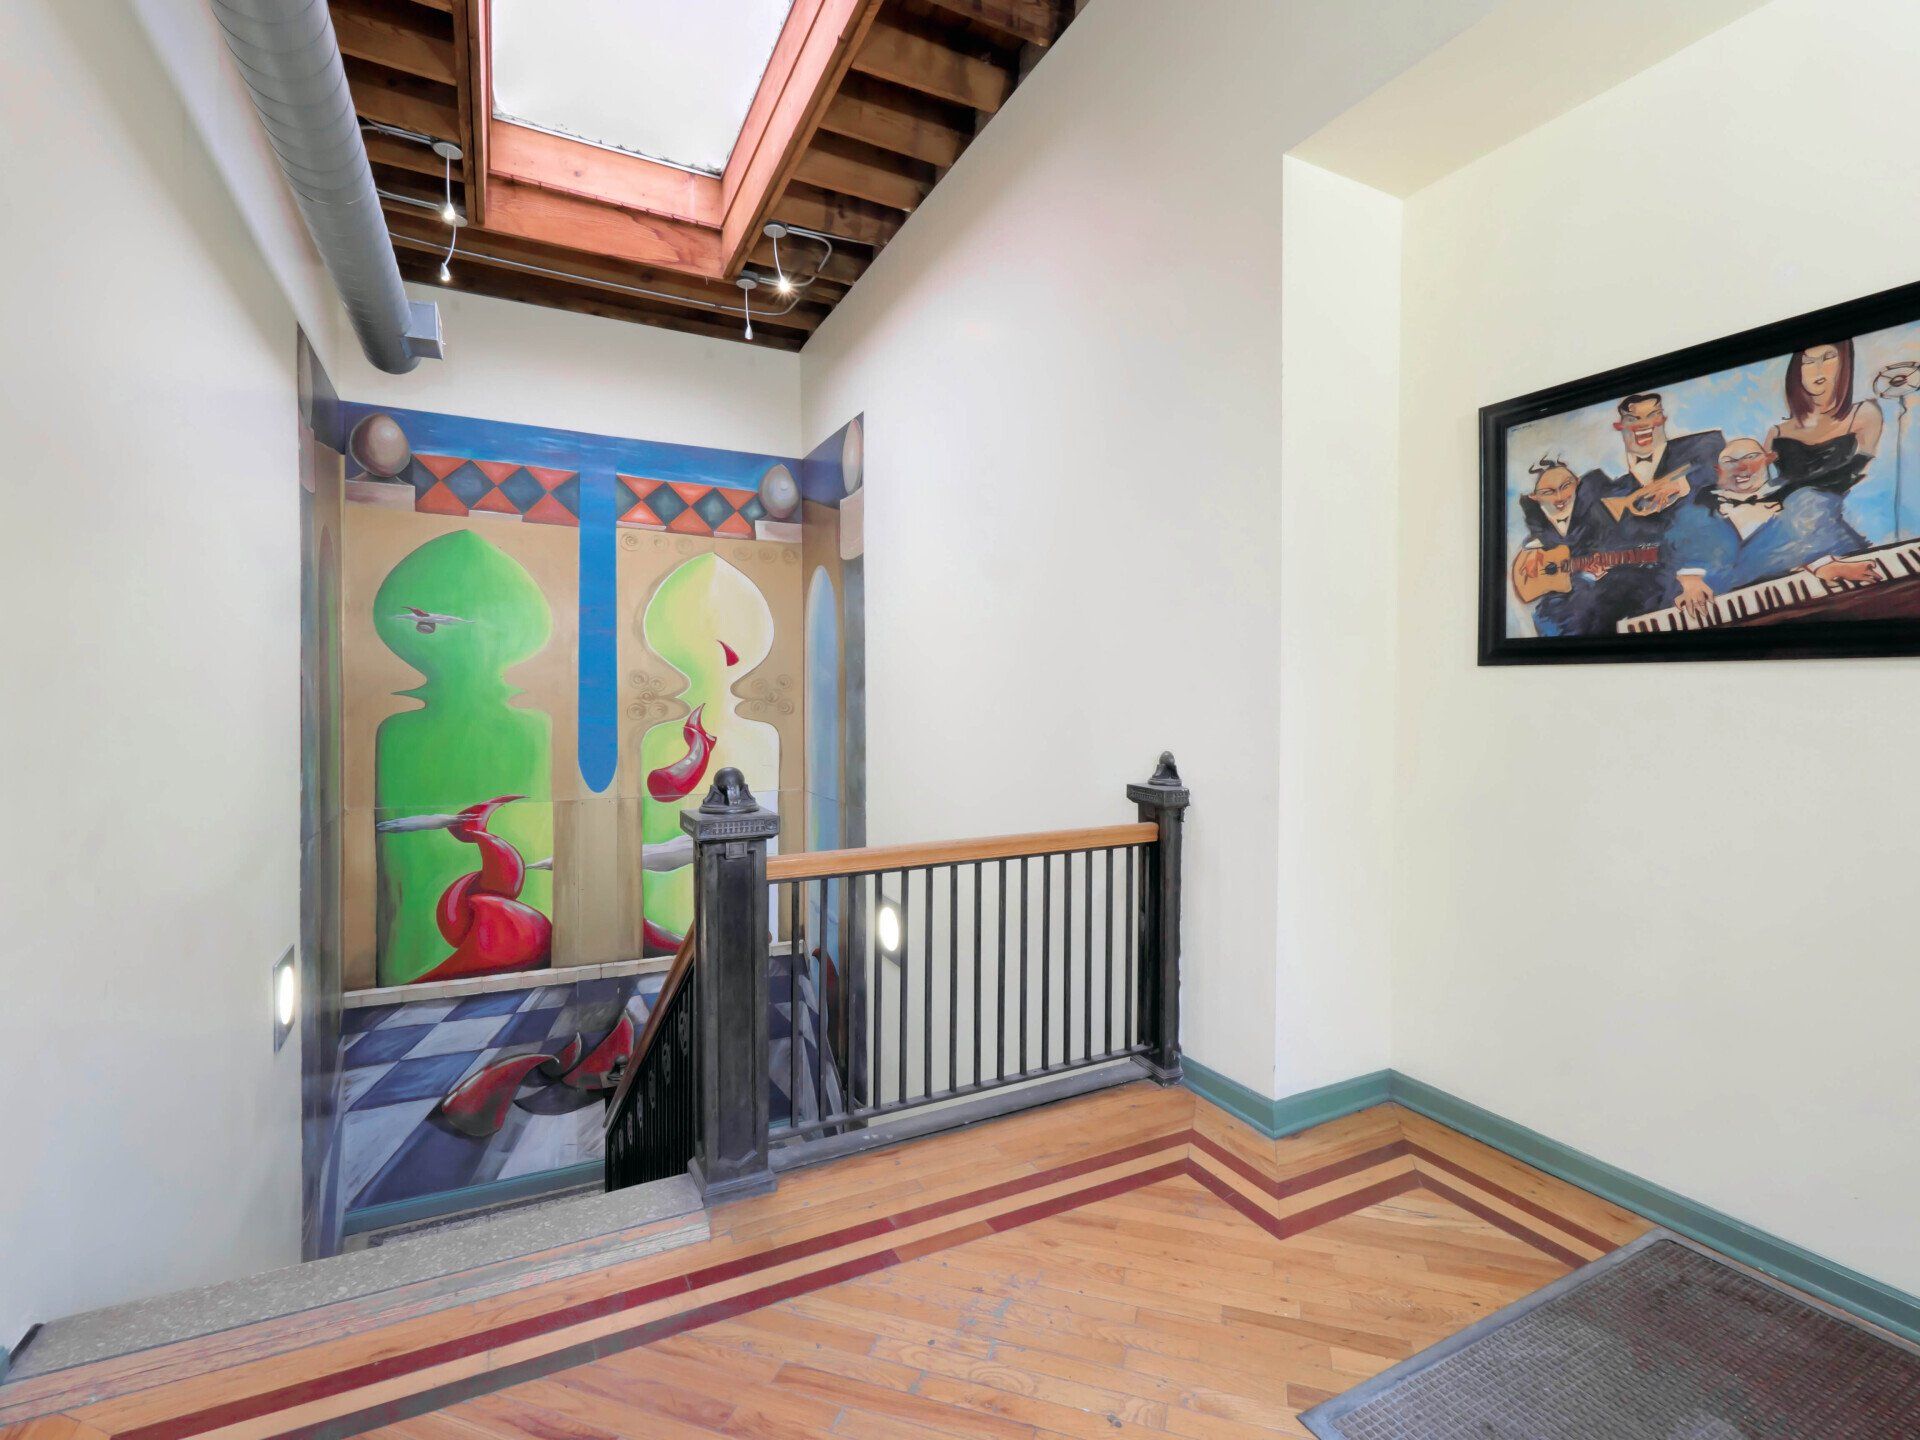 A staircase with a painting on the wall and a picture on the wall at 1550 North Damen.